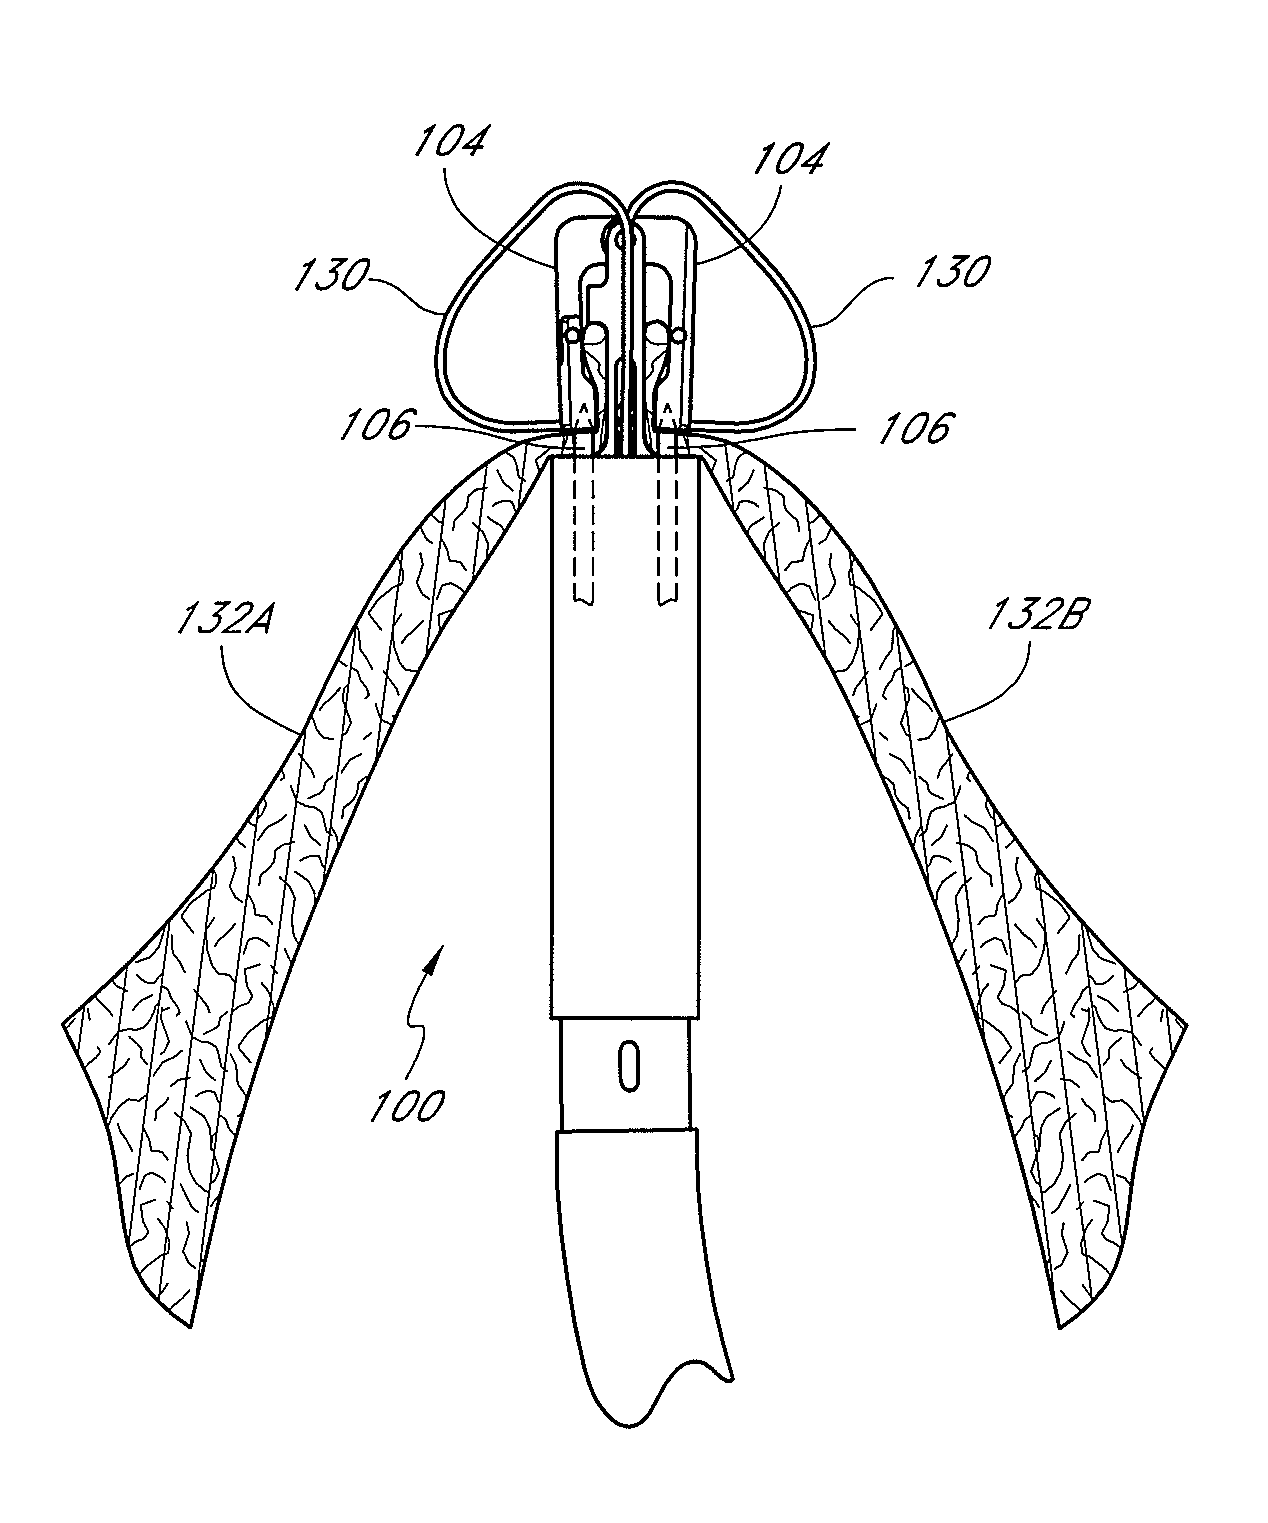 Suturing devices and methods for suturing an anatomic valve